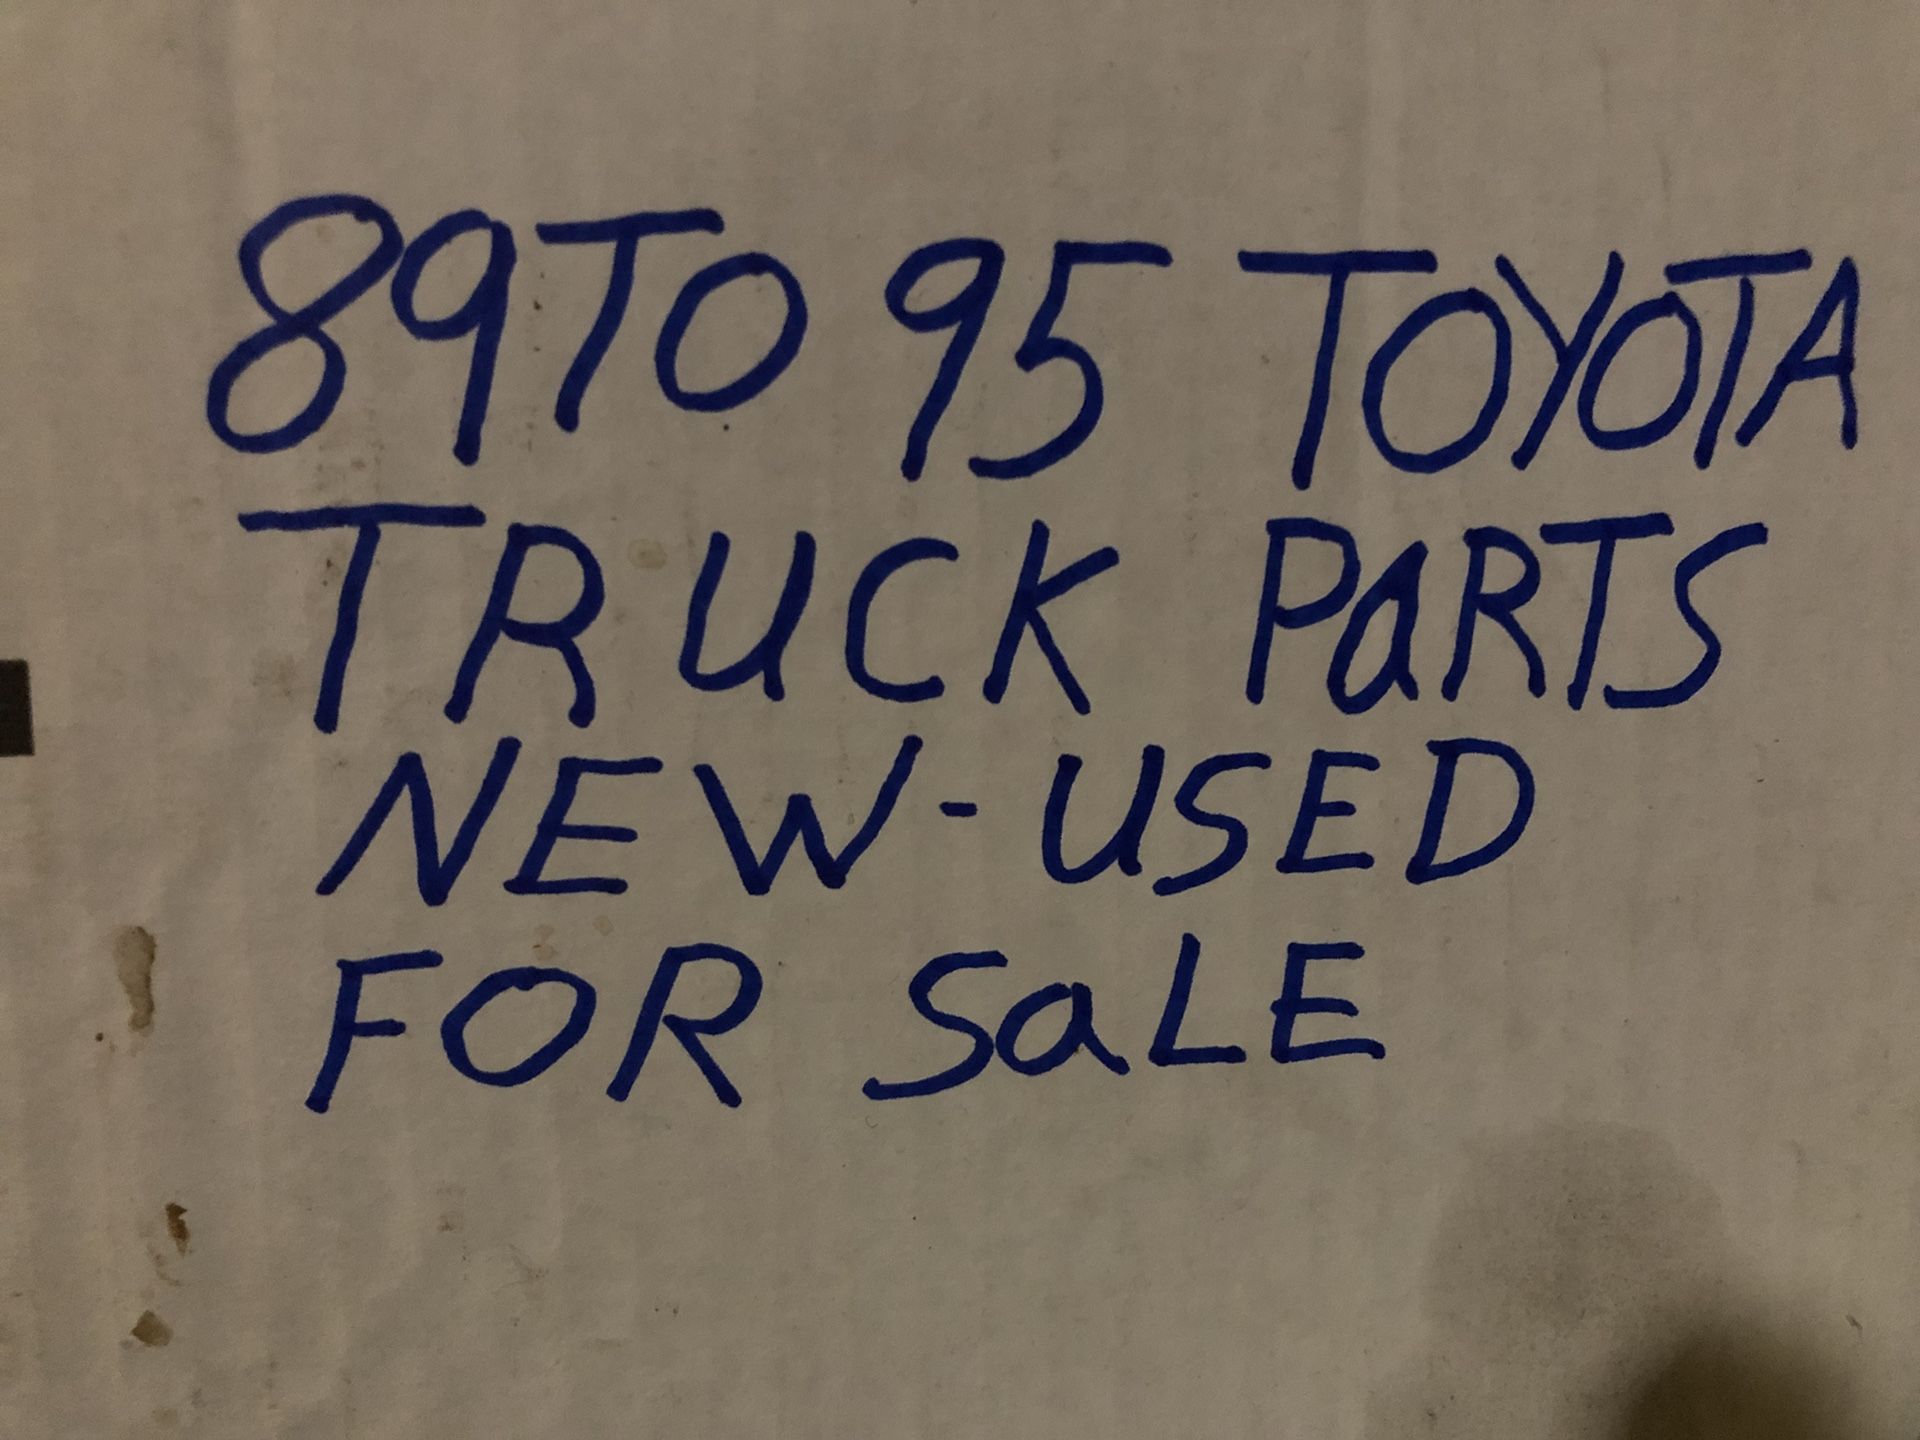 1994 Toyota truck parts new and used